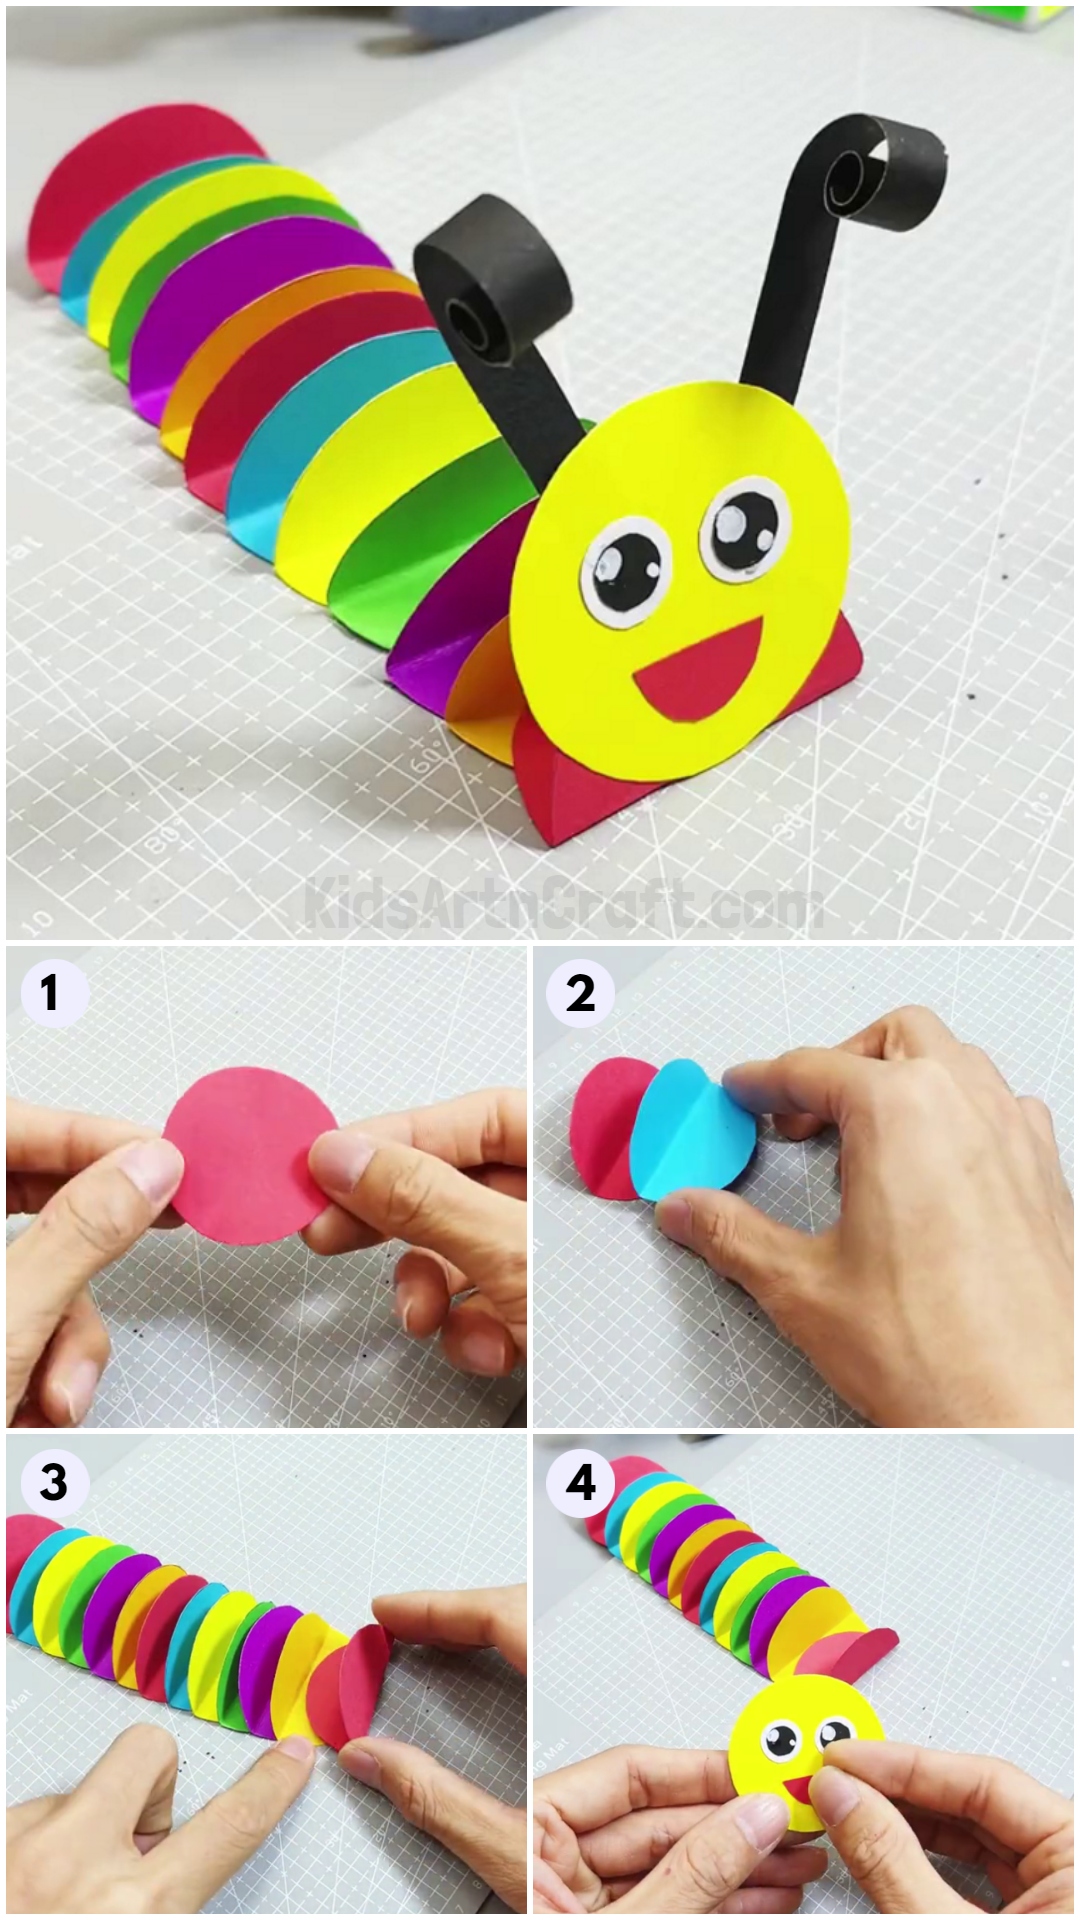  How To Make Paper Circle Caterpillar Craft For Kids